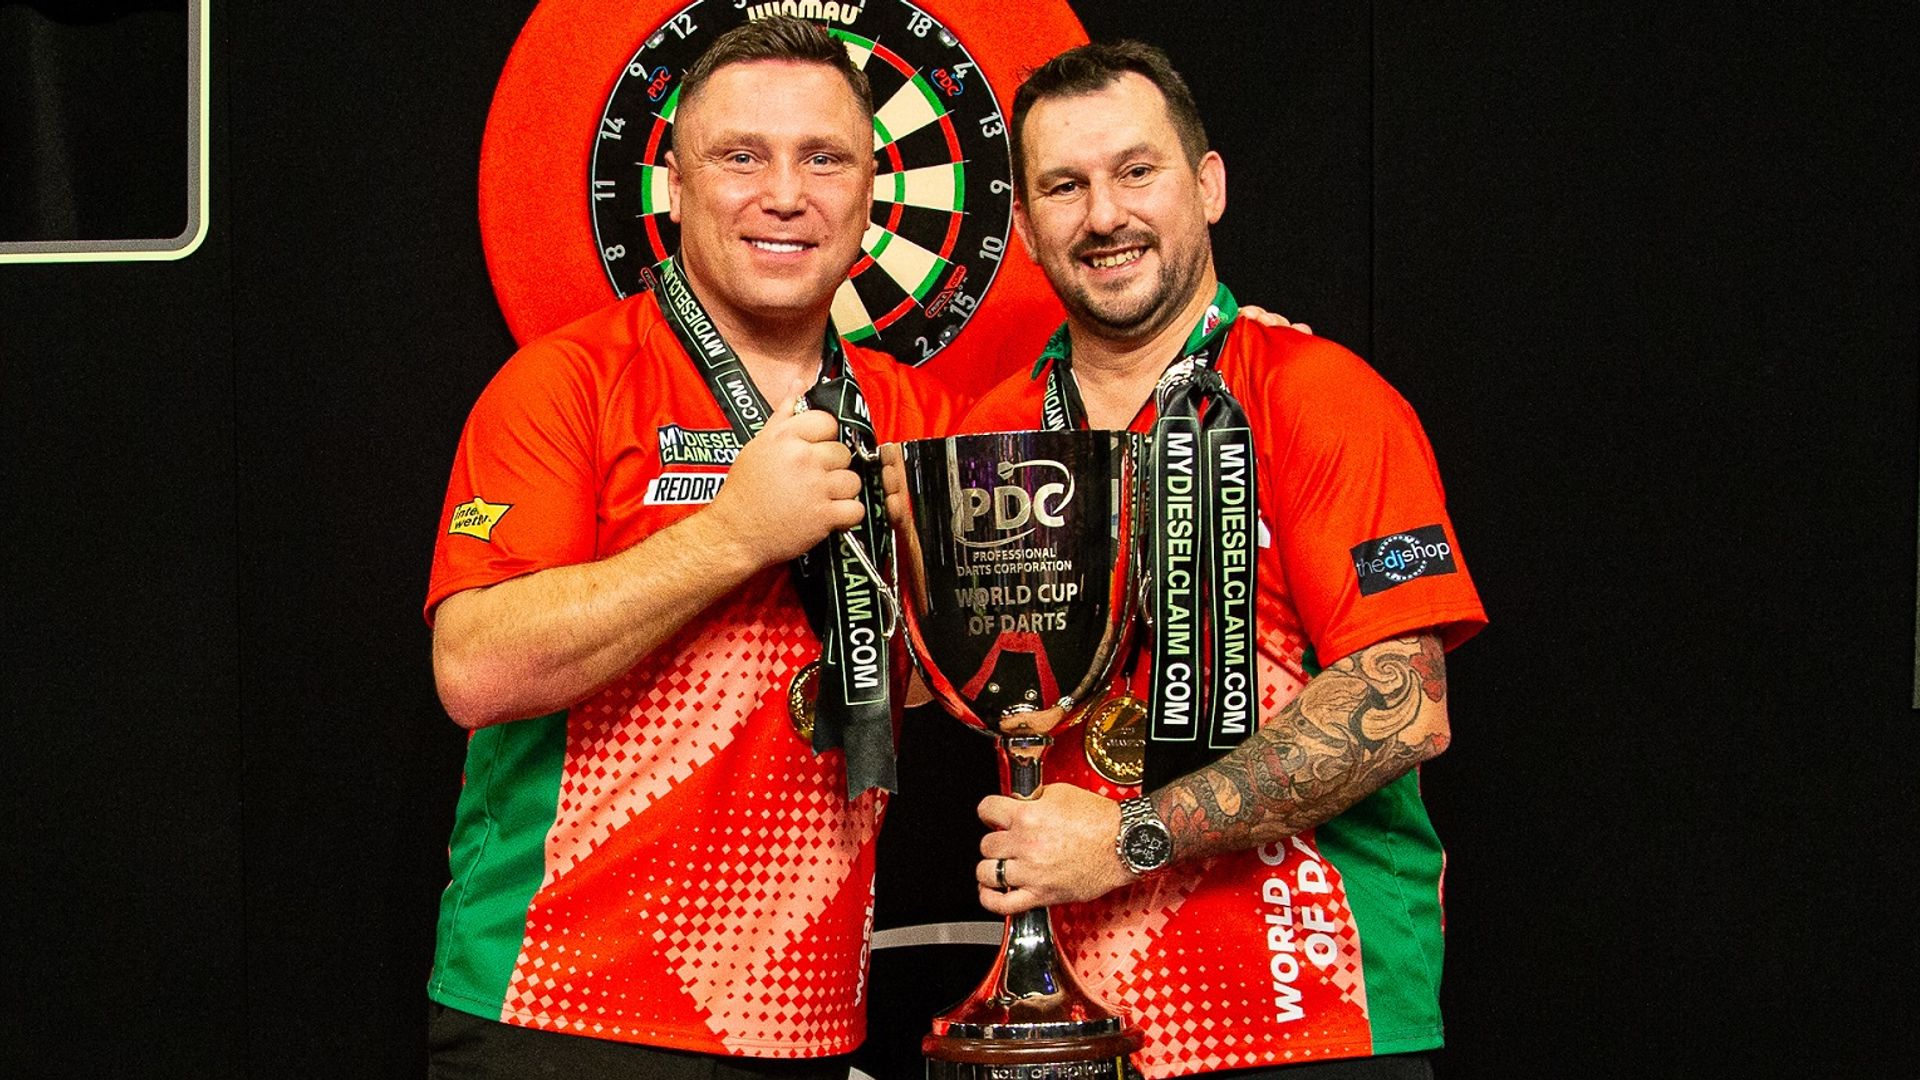 Wonderful Wales win World Cup of Darts for second time